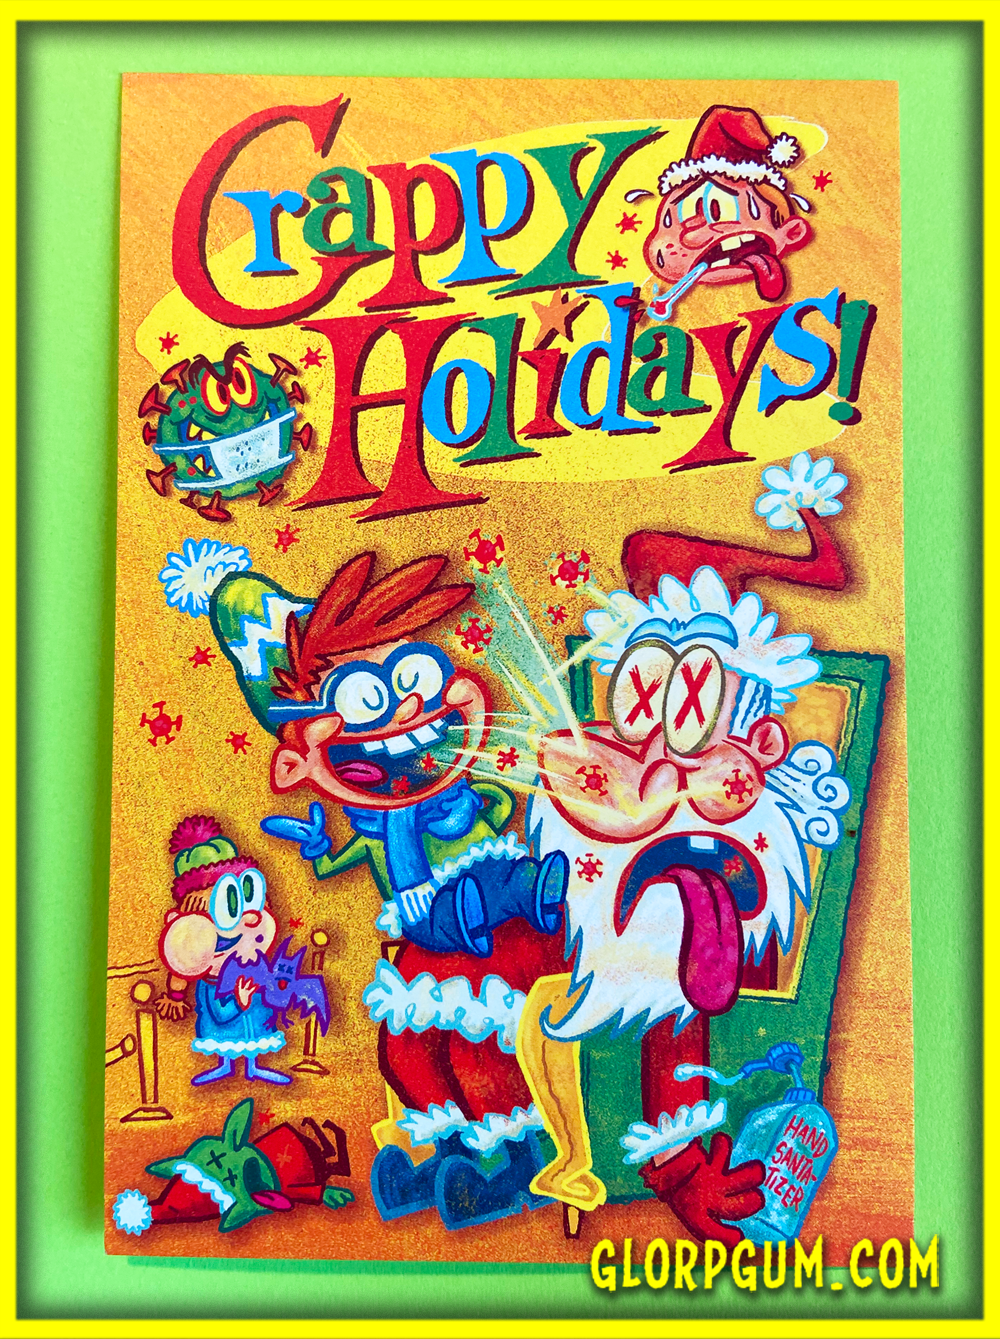 Crappy Holidays! Holiday Cards